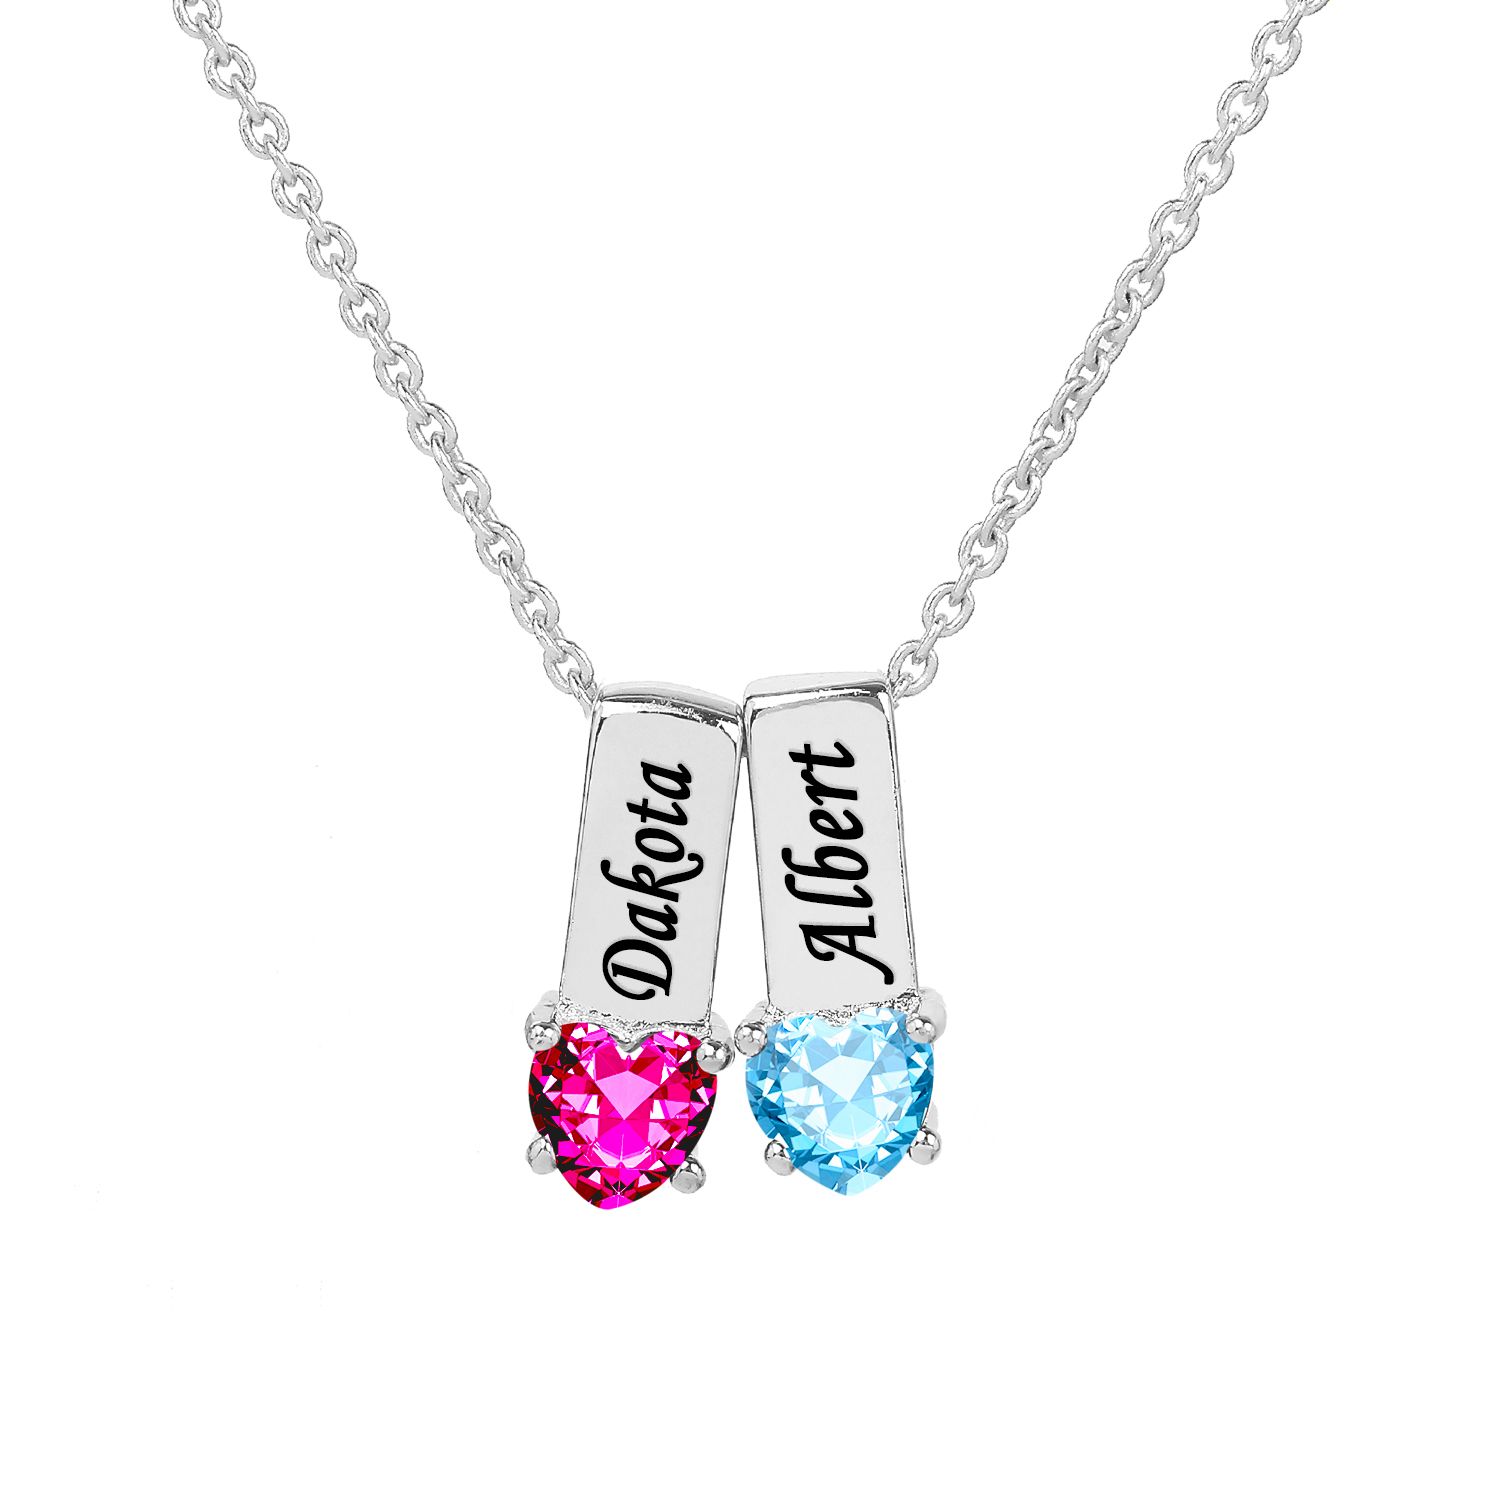 Fingerhut Jay Aimee Designs Sterling Silver Personalized Family Name And 2 Heart Shape Birthstone Charm Pendant